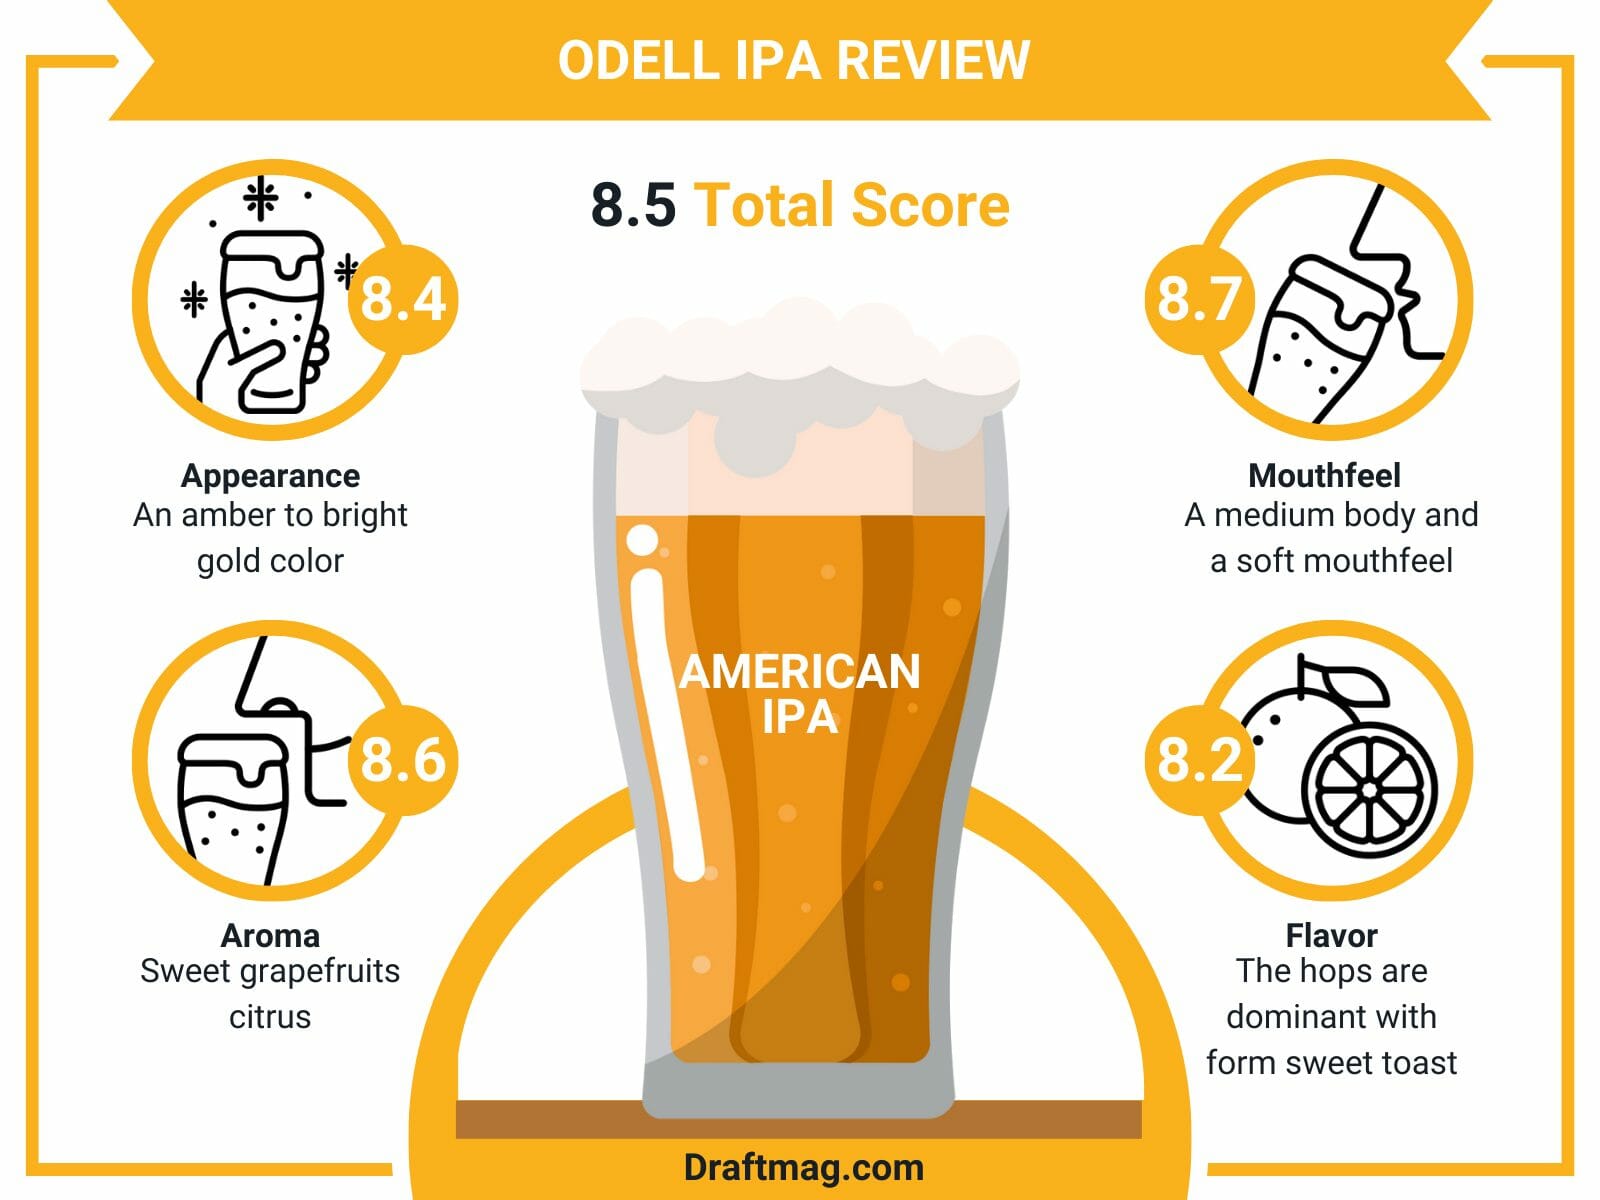 Odell ipa review infographic